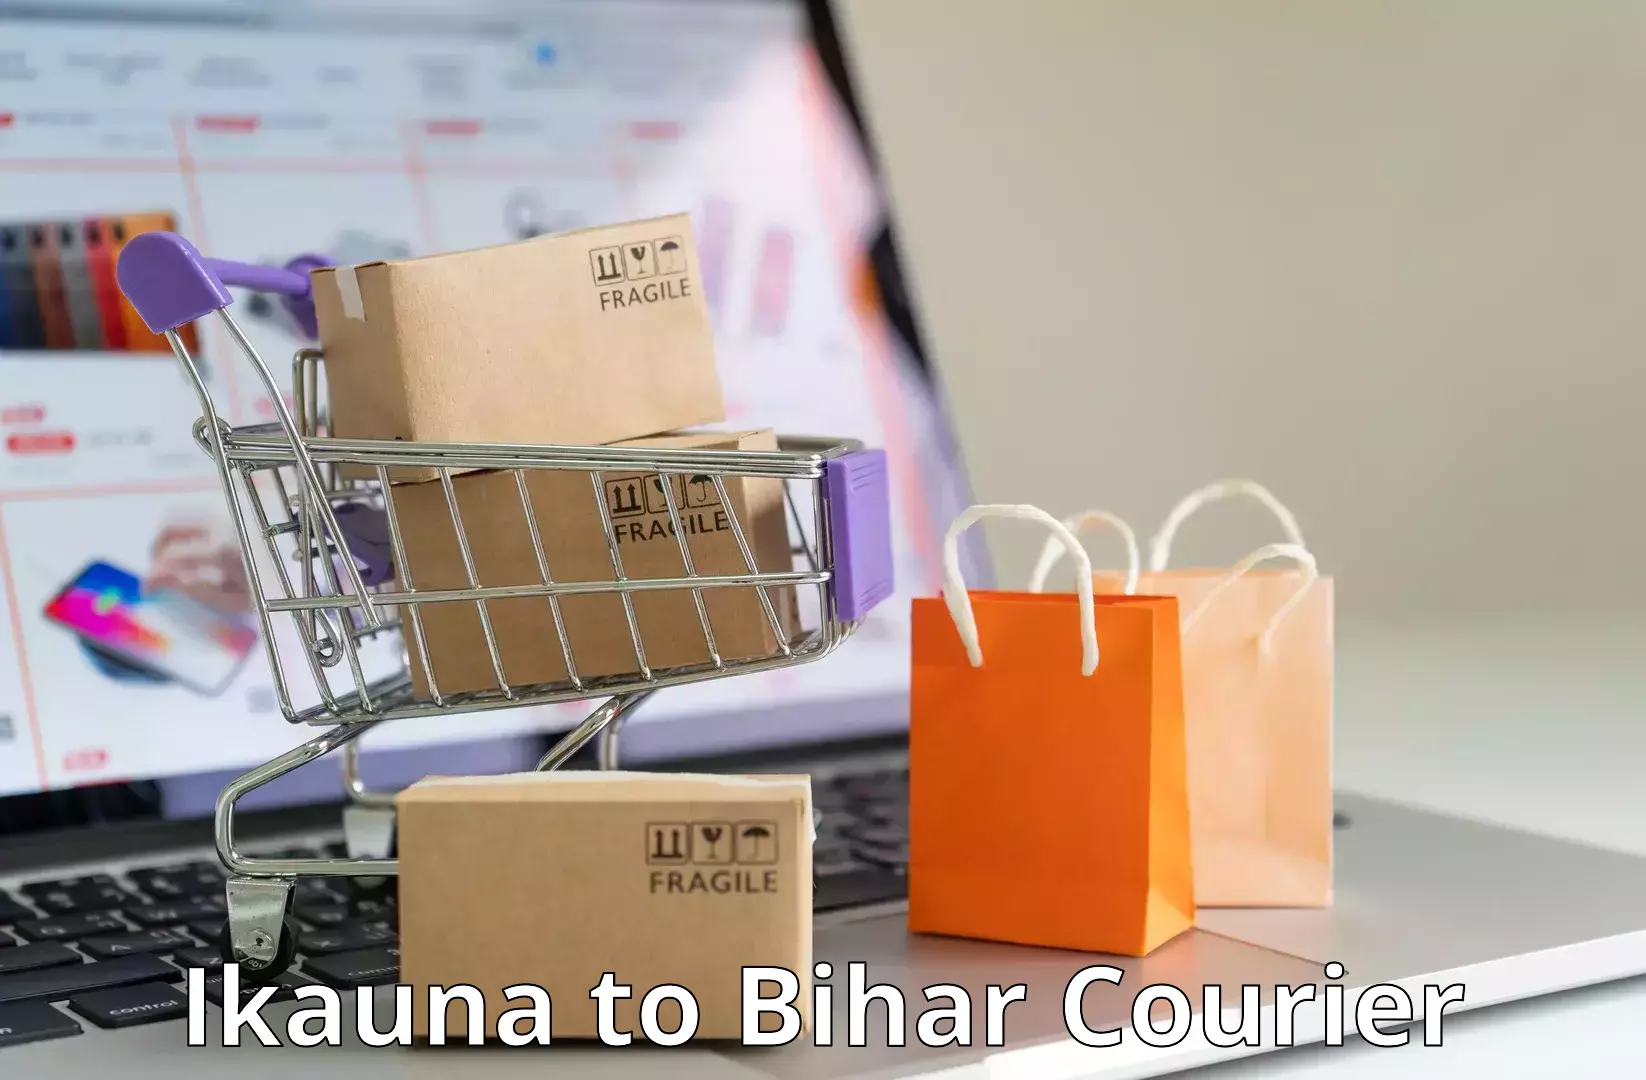 Express package delivery Ikauna to Bihar